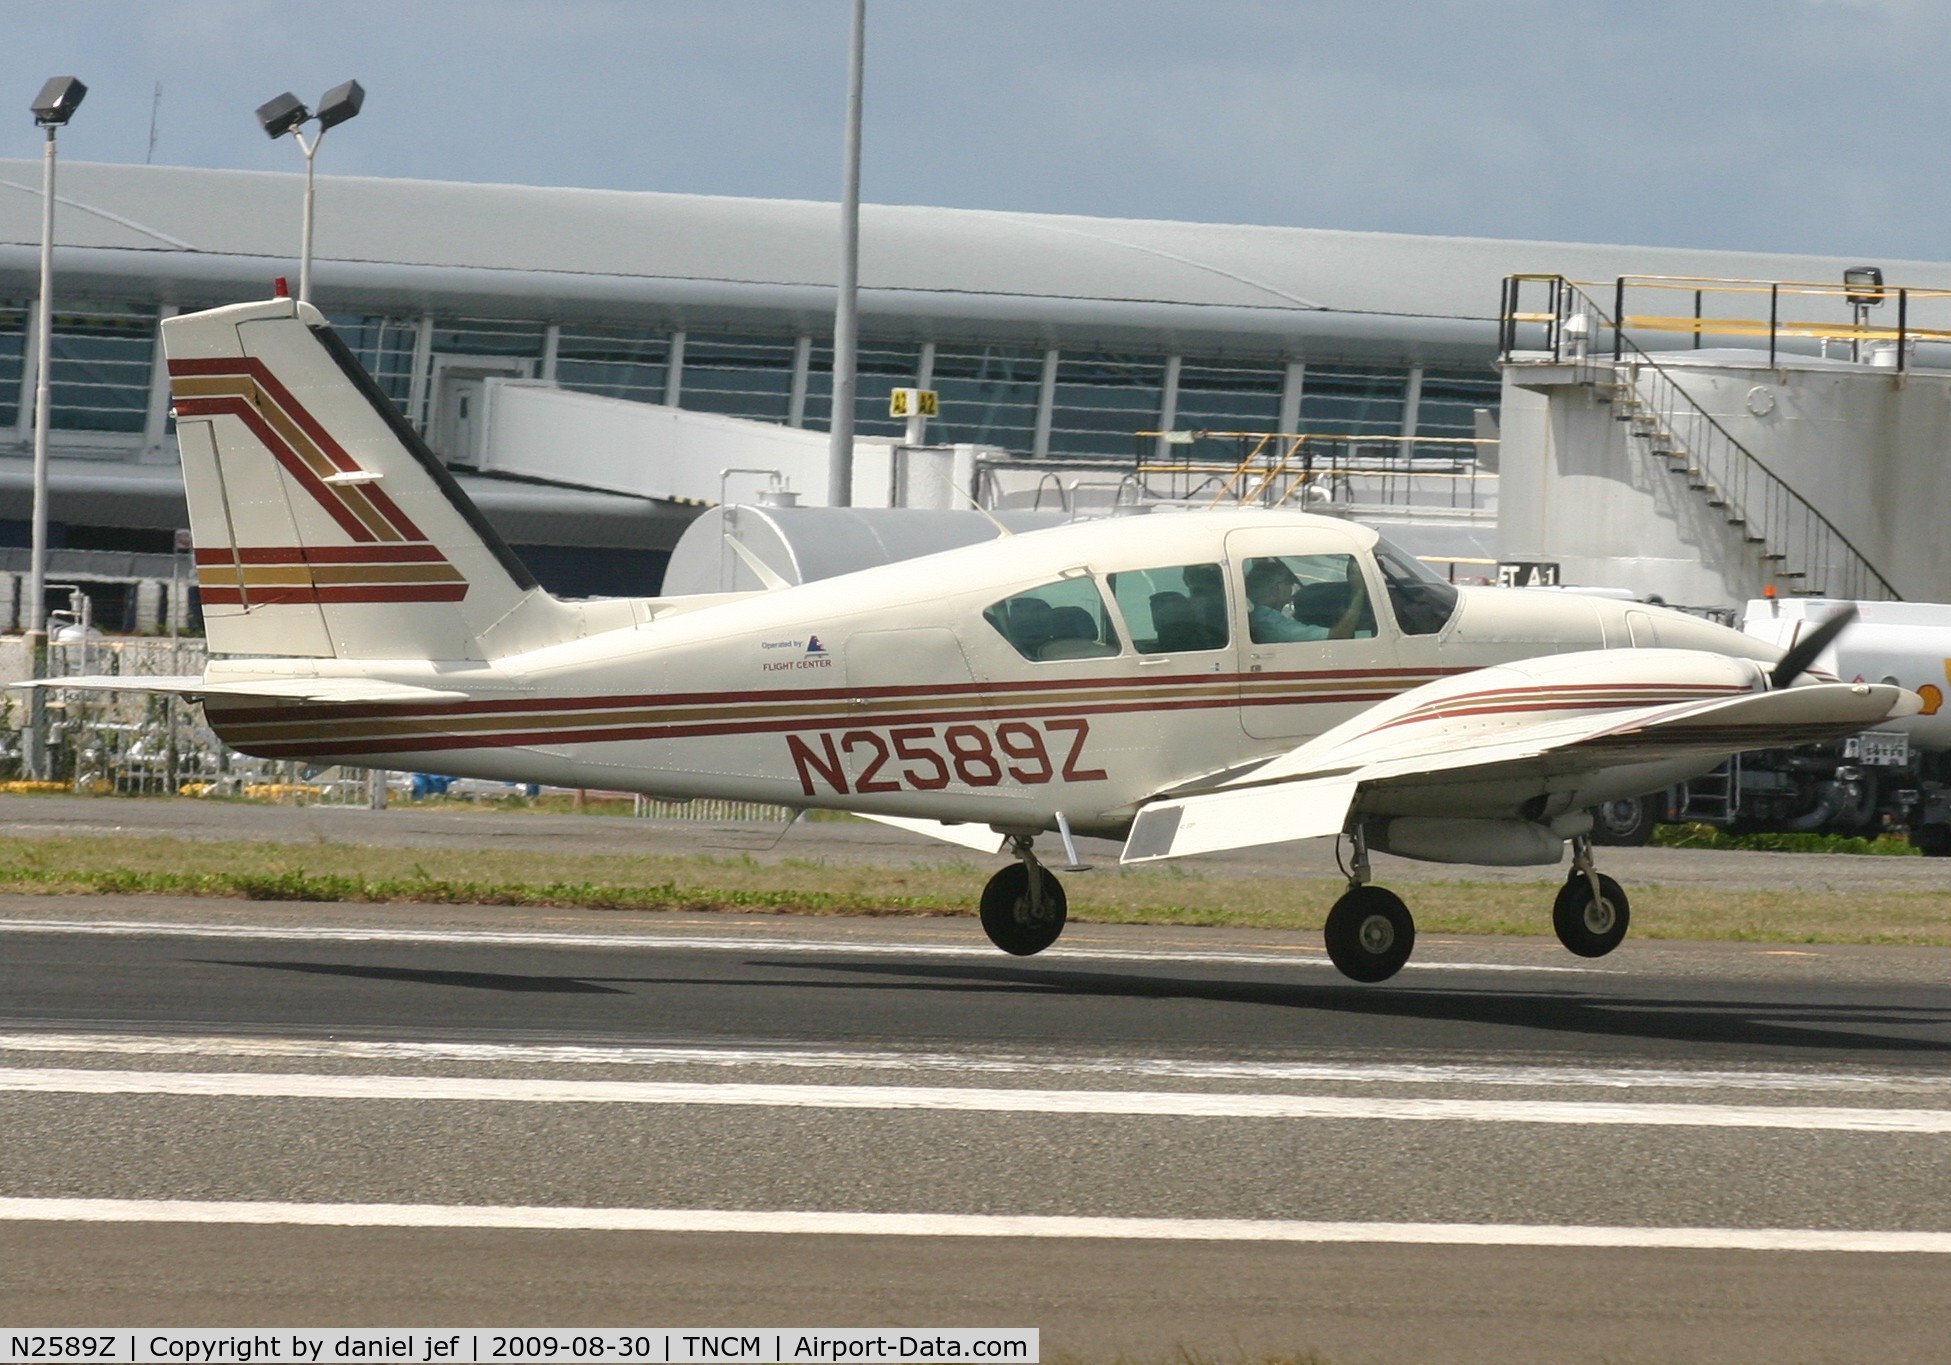 N2589Z, 1980 Piper PA-23-250 Aztec C/N 27-8154006, landing on a short stop over